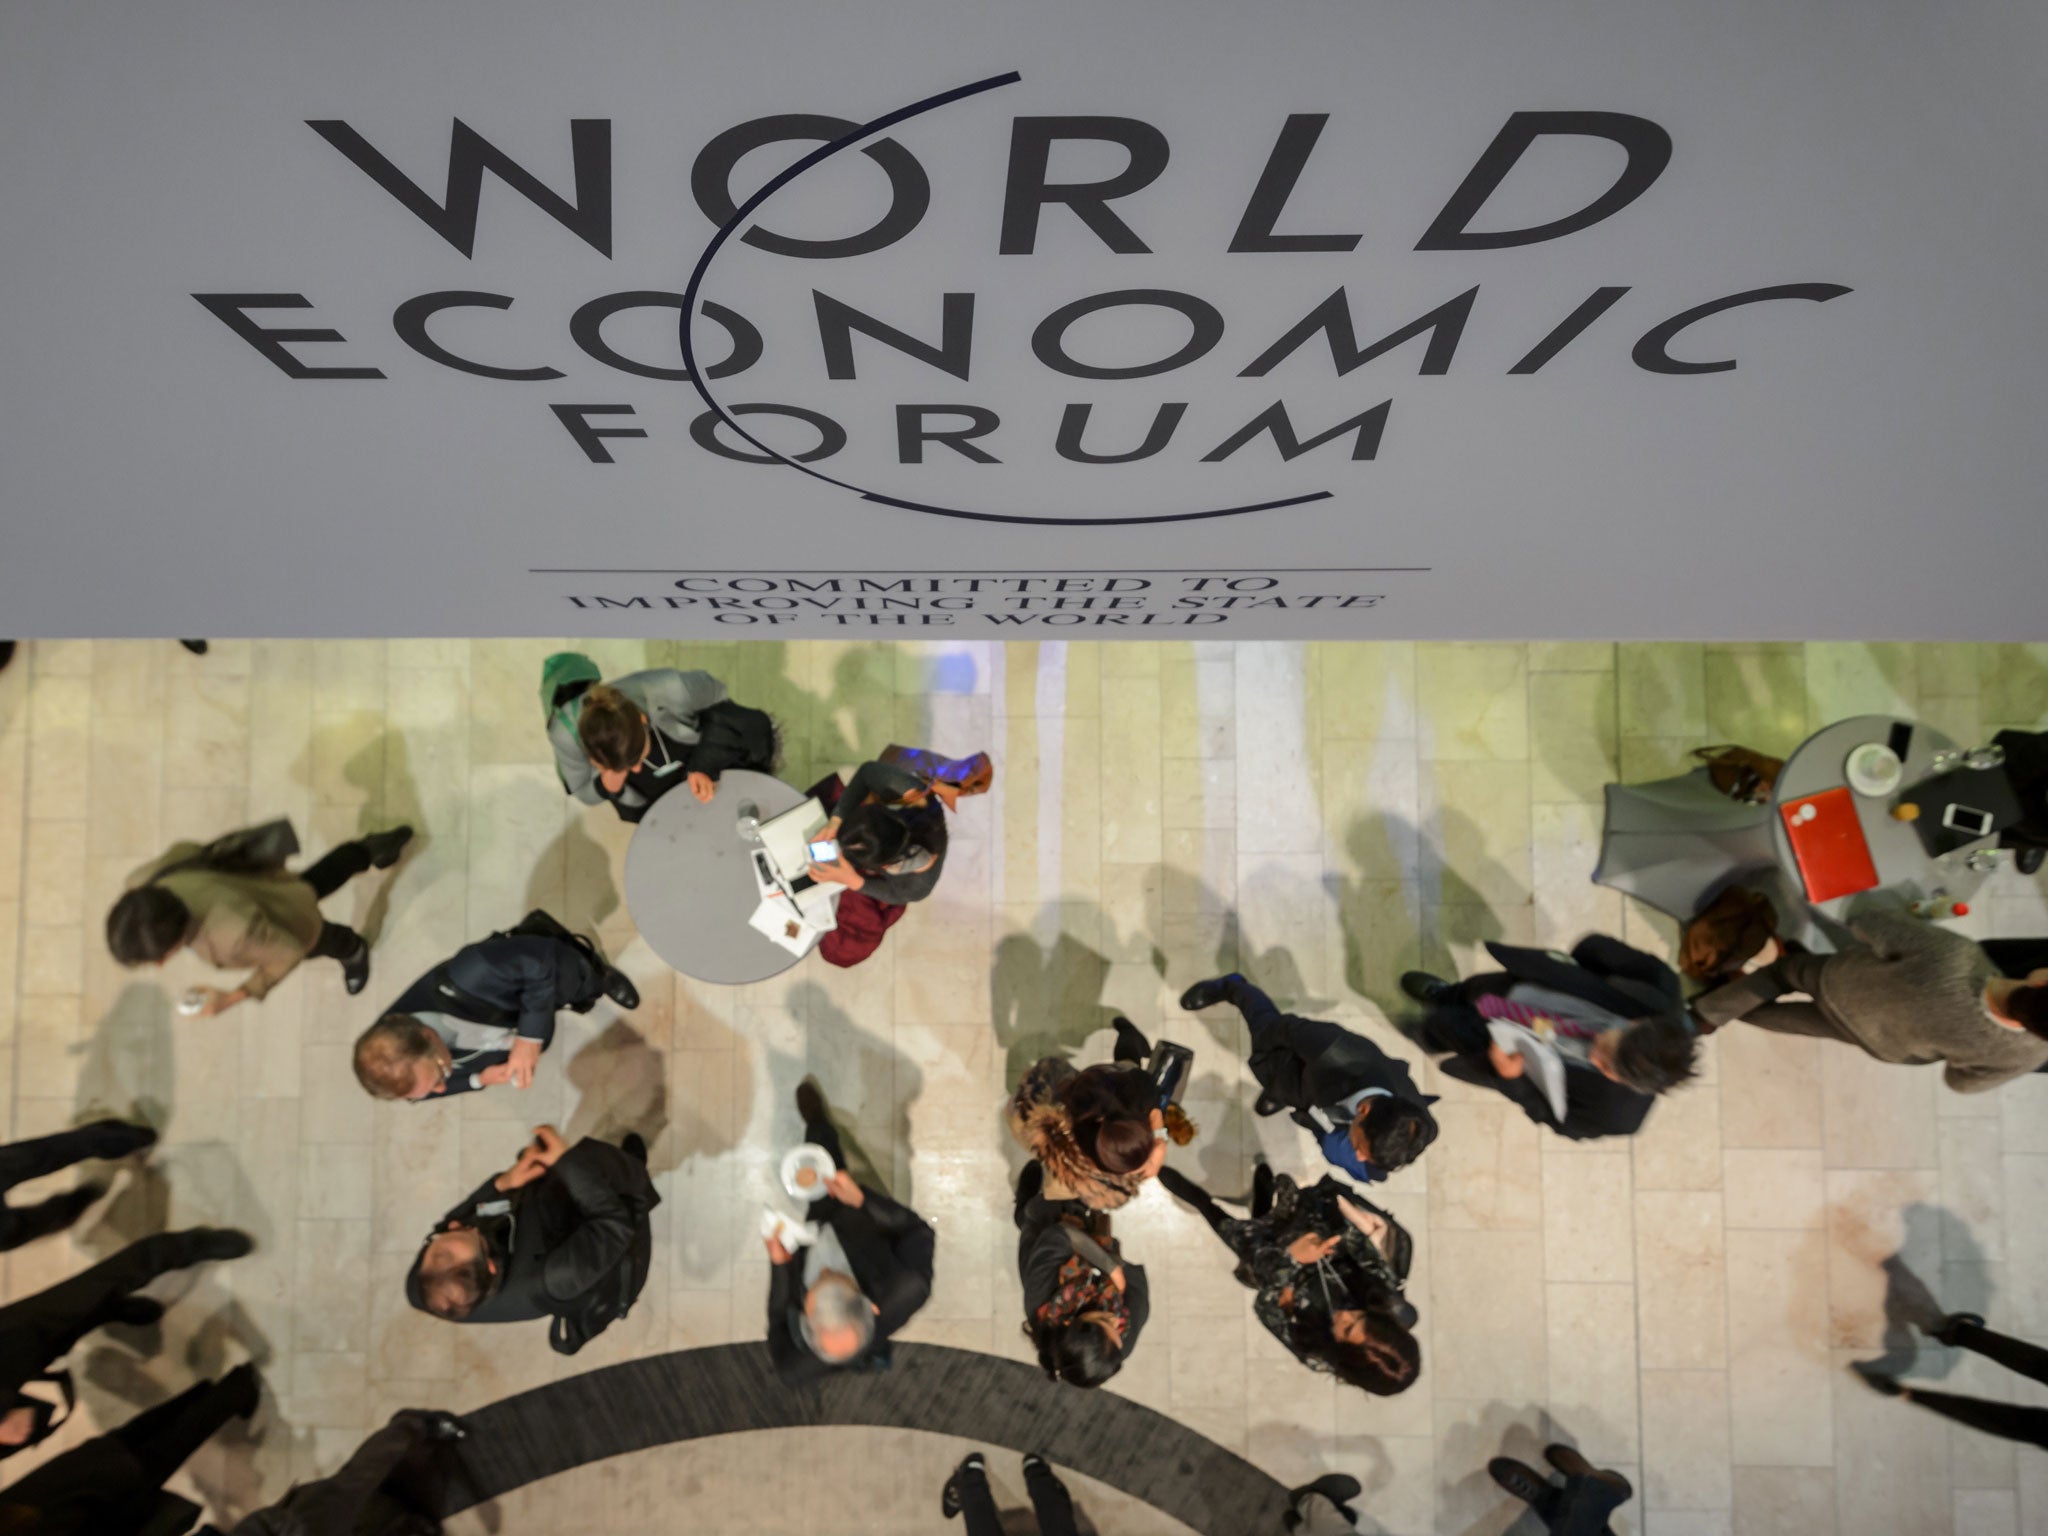 Participants are seen at the Congress Center during the World Economic Forum (WEF) annual meeting on 21 January, 2014, in Davos